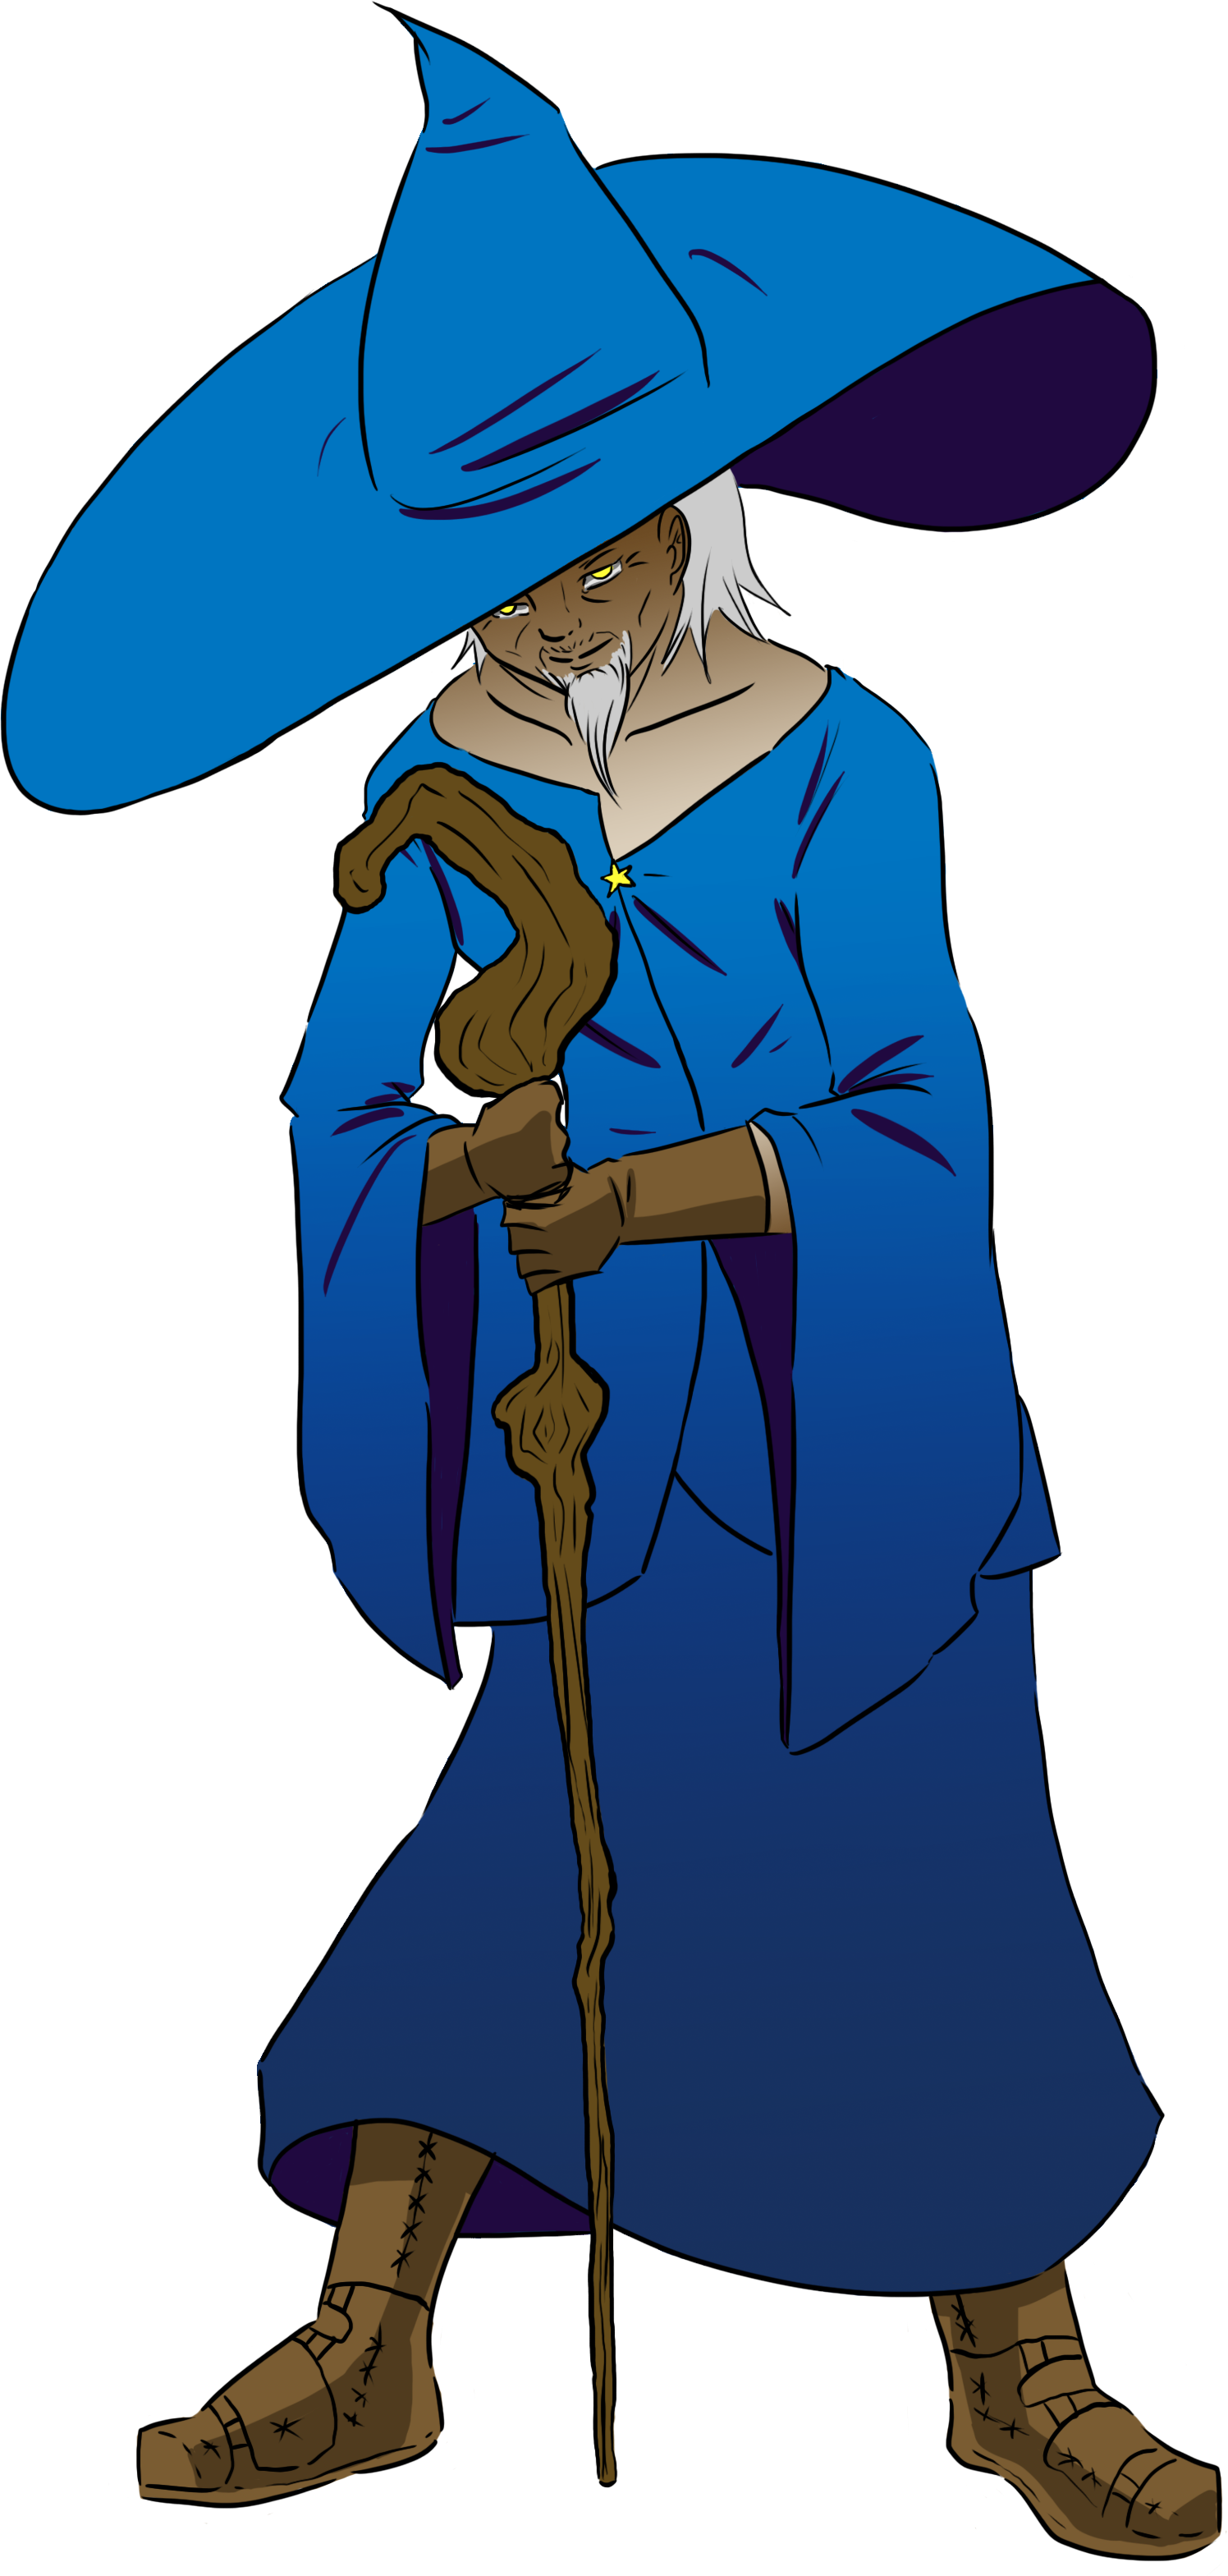 The Wizard (1496x3137)